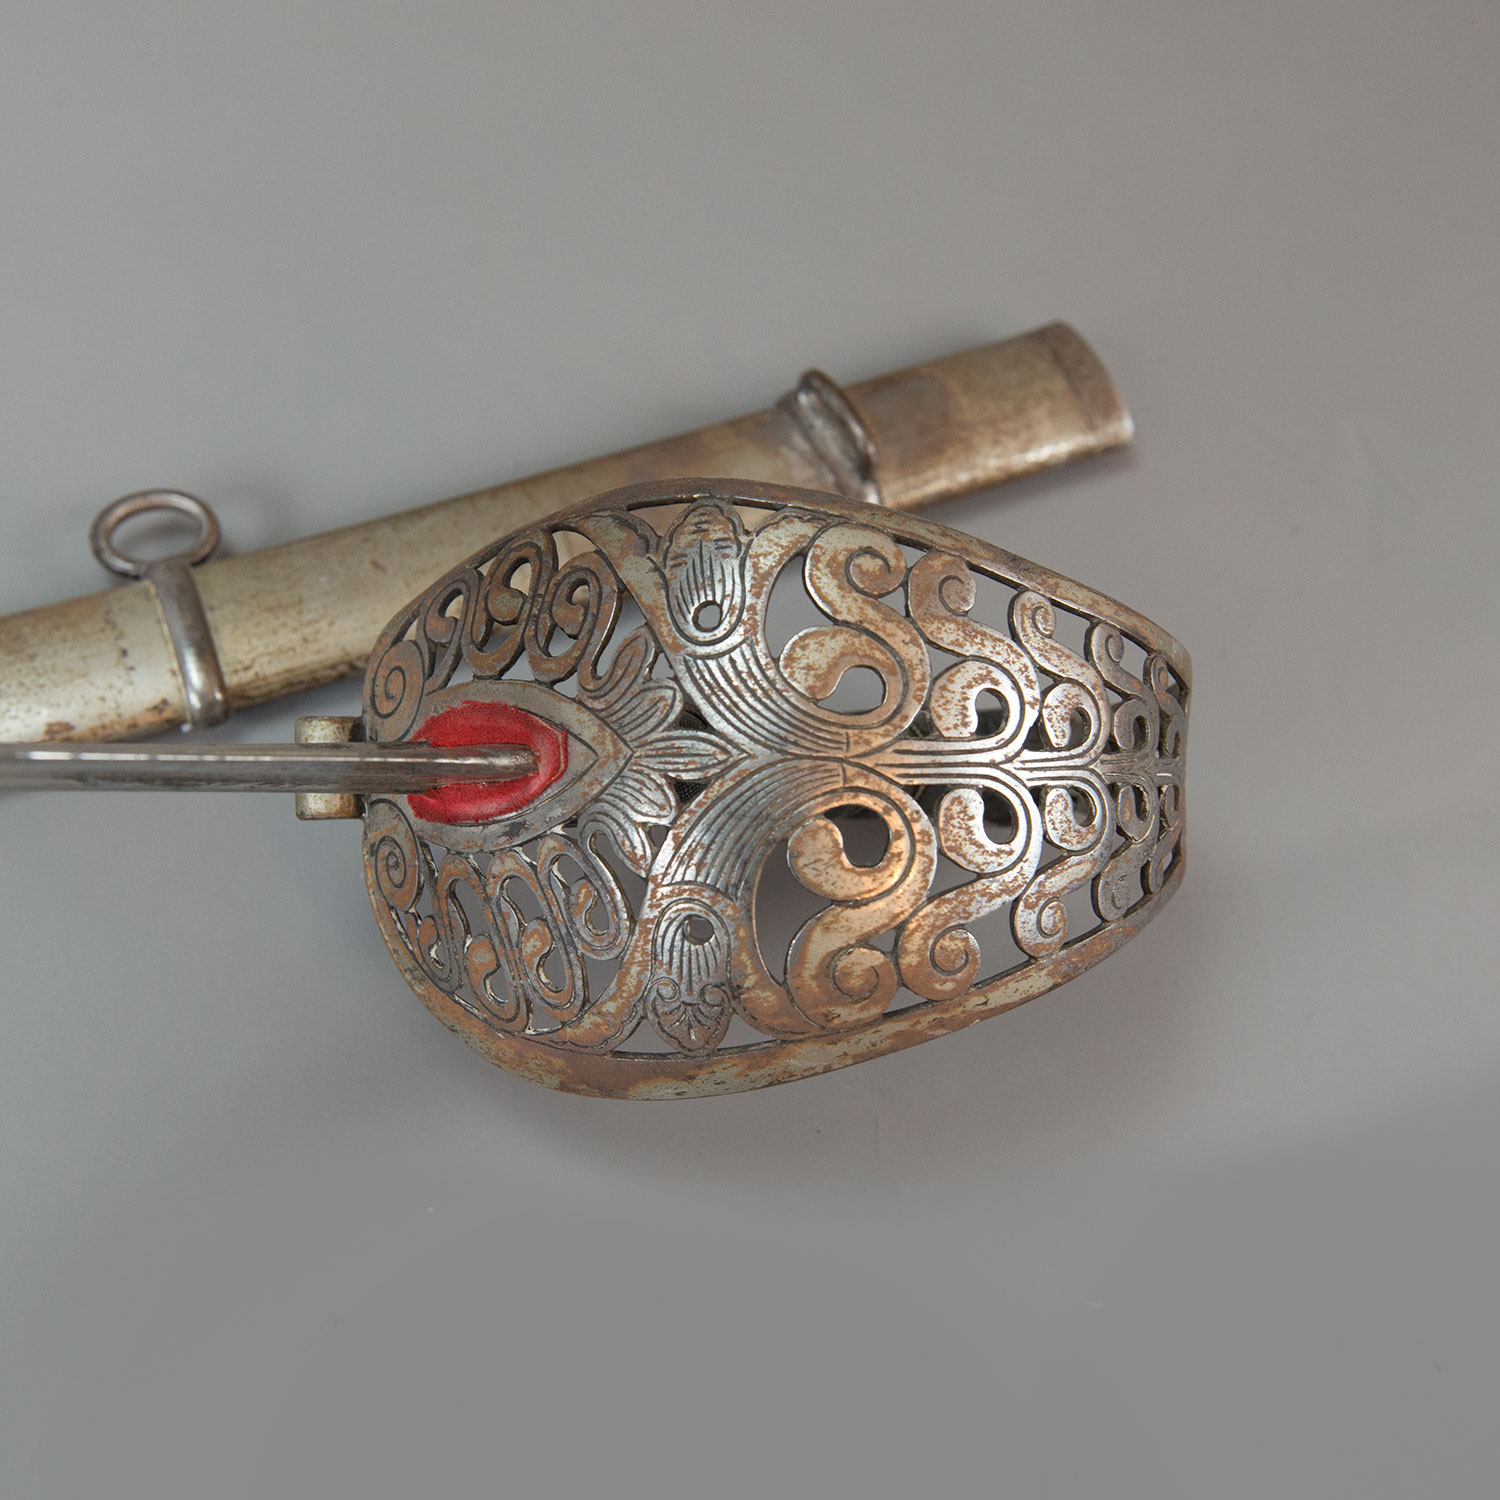 Austro-Hungarian Monarchy Cavalry Saber - Image 2 of 3